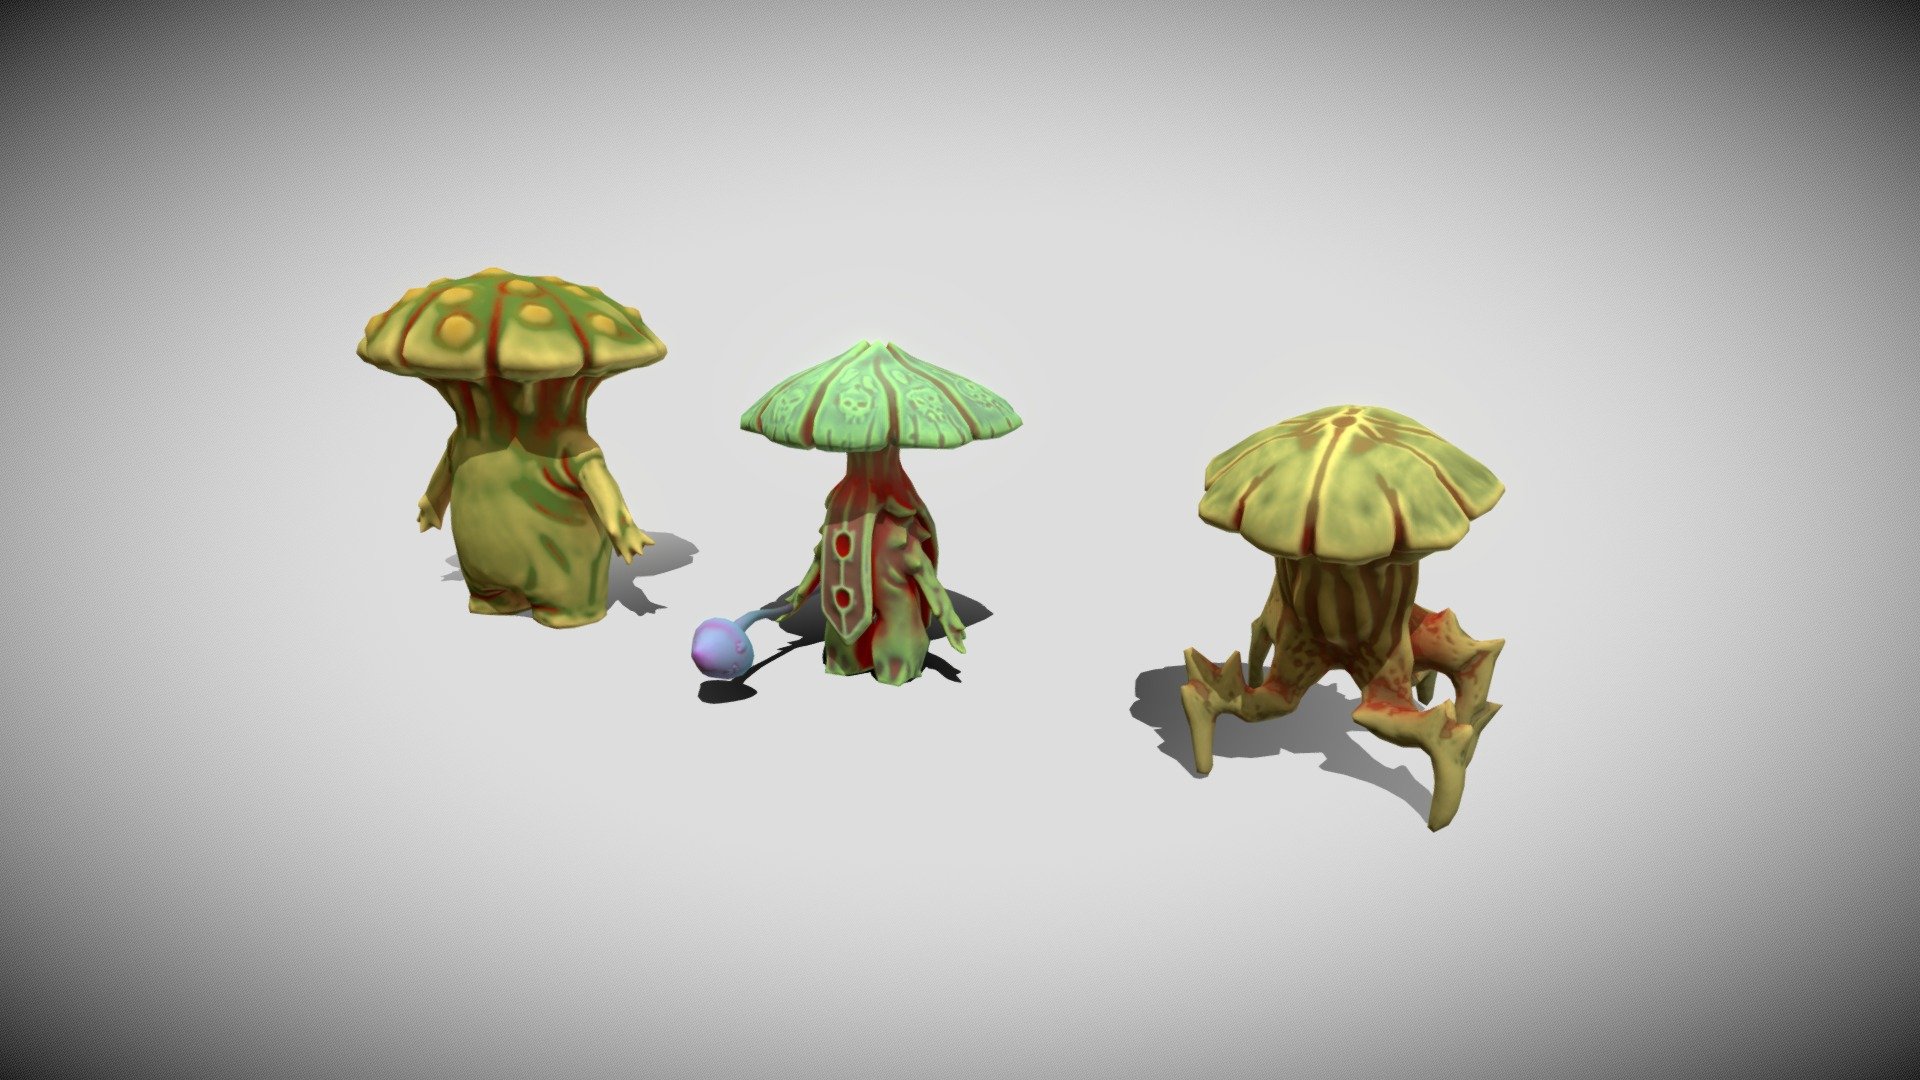 A set of enemies for an unnamed game - a dice roguelike.

You can learn more about the game and try an early version on our Discord:
https://discord.com/invite/5AnXVPCqyx

twitter: https://twitter.com/Timskafte - Corrupt Mushroom Tribe - 3D model by Tim Skafte (@timskafte) 3d model